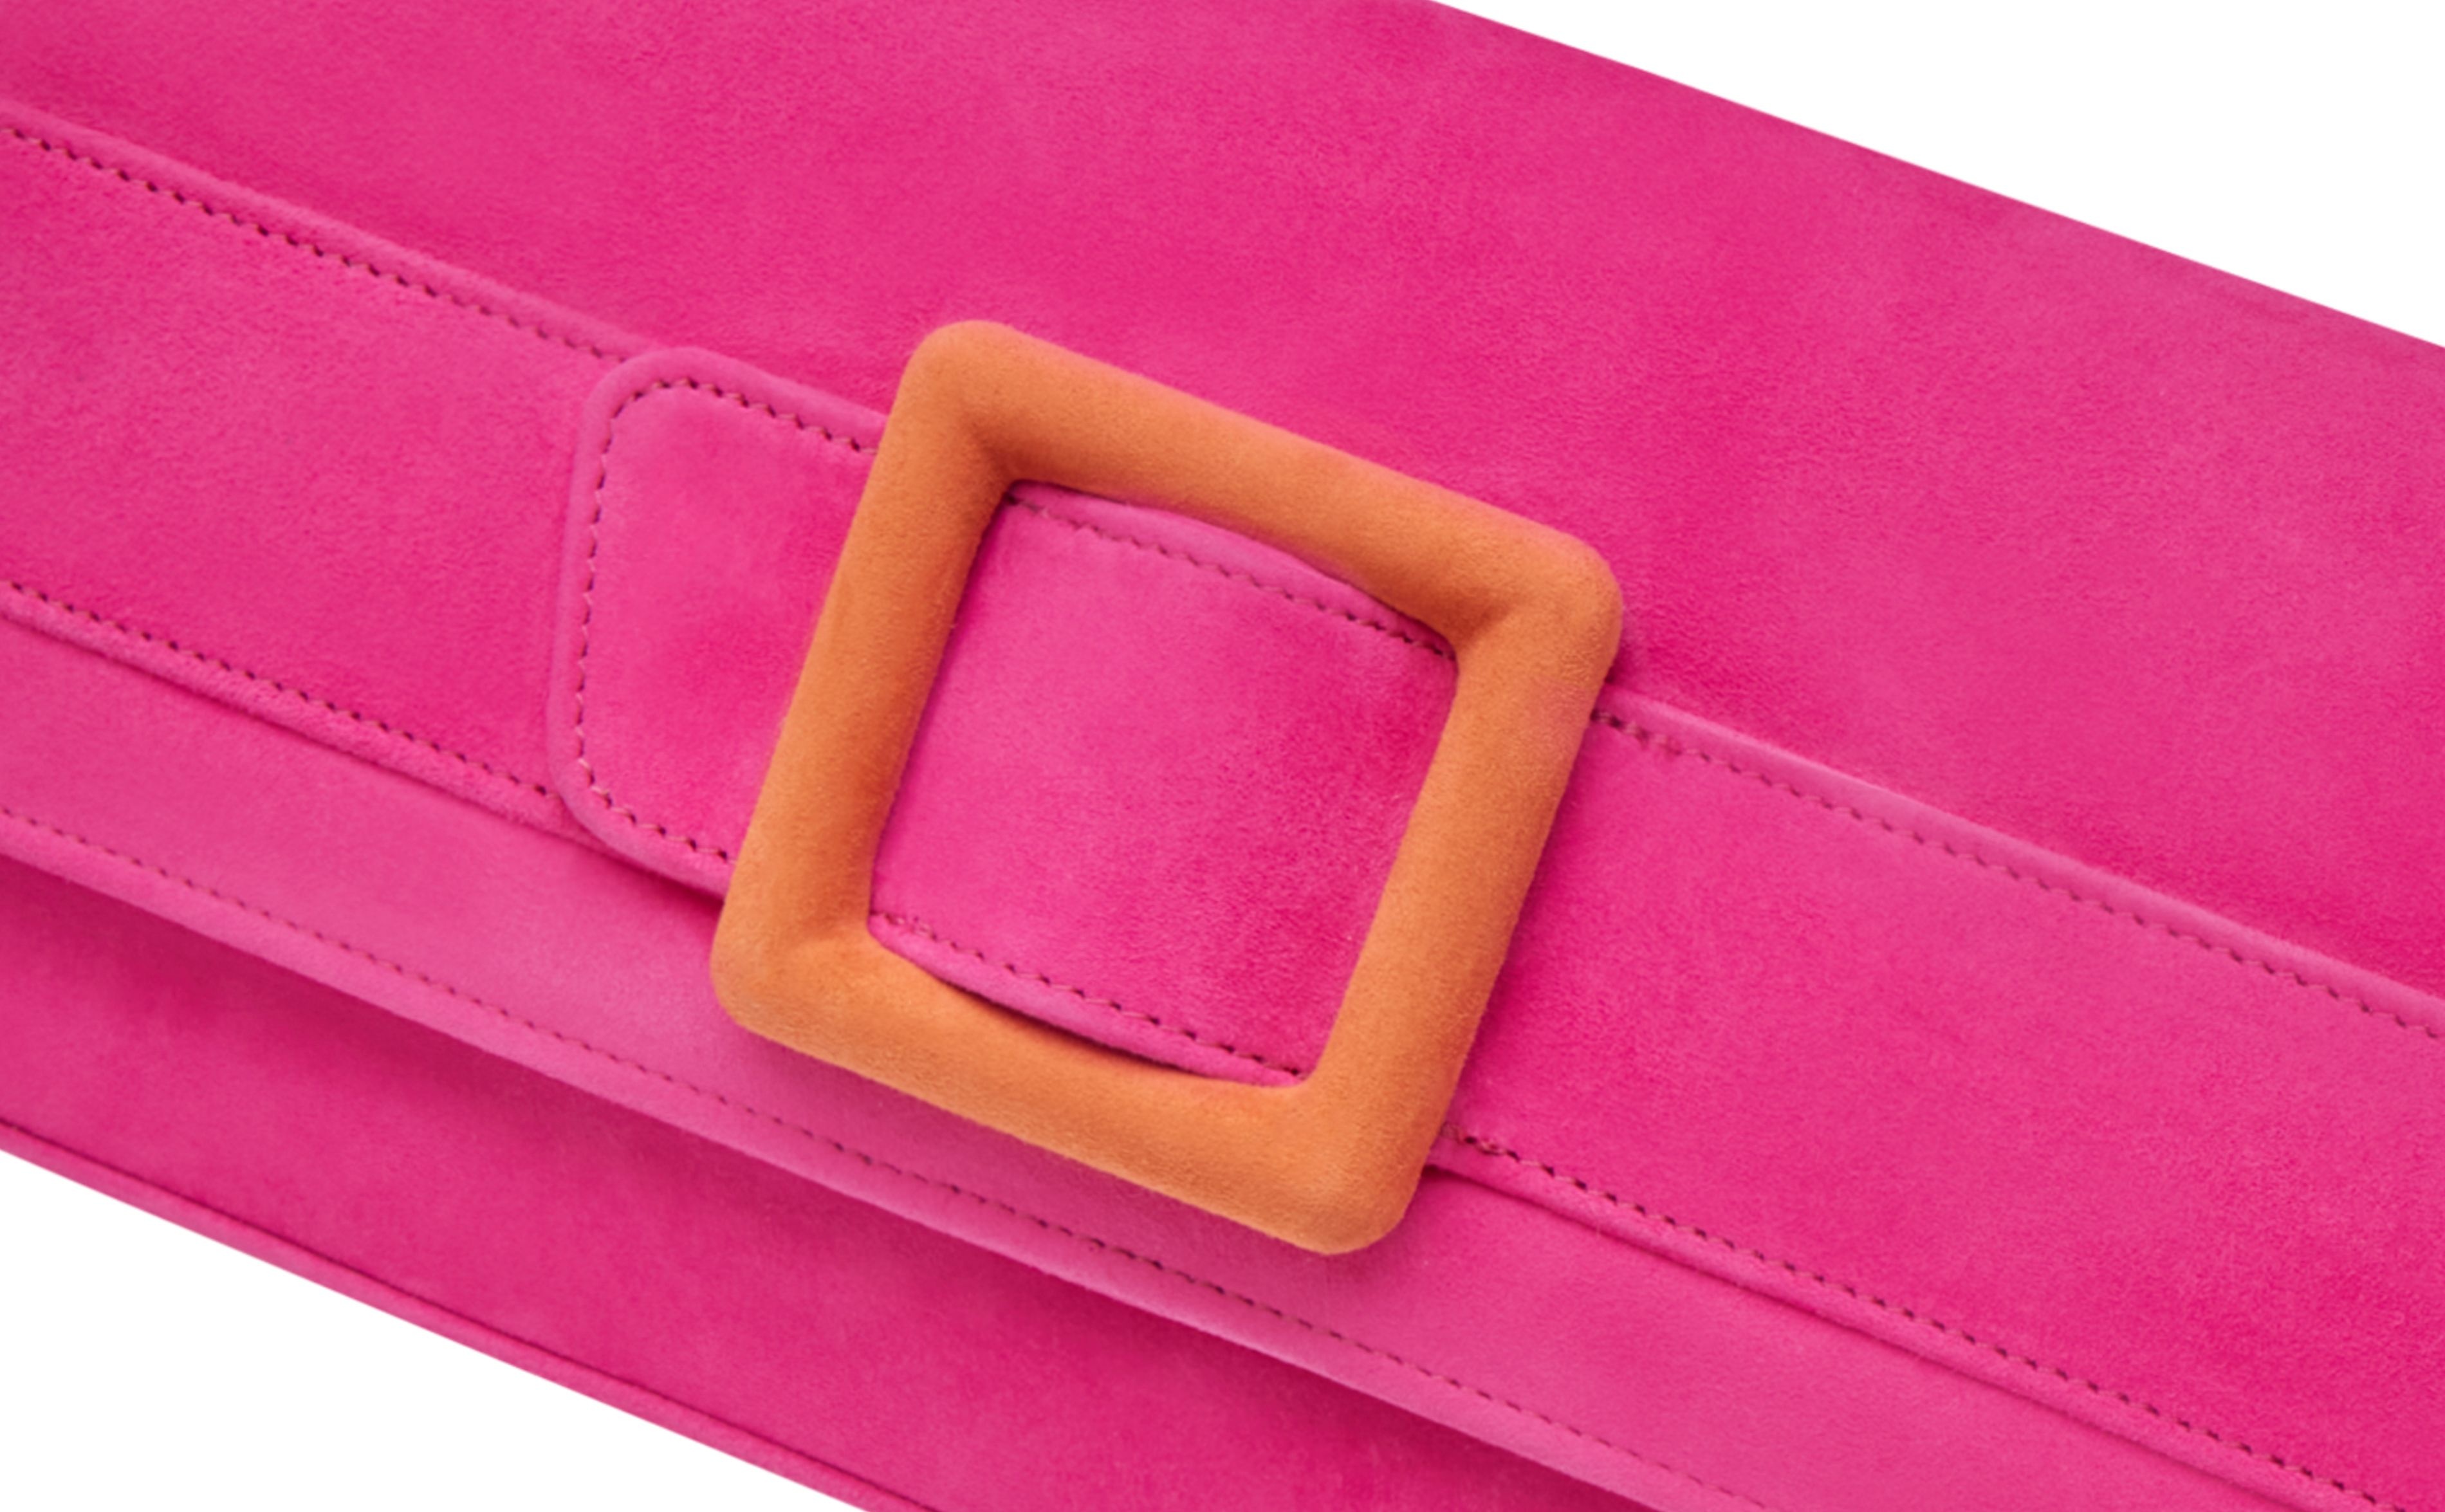 Bright Pink and Orange Suede Buckle Clutch - 4